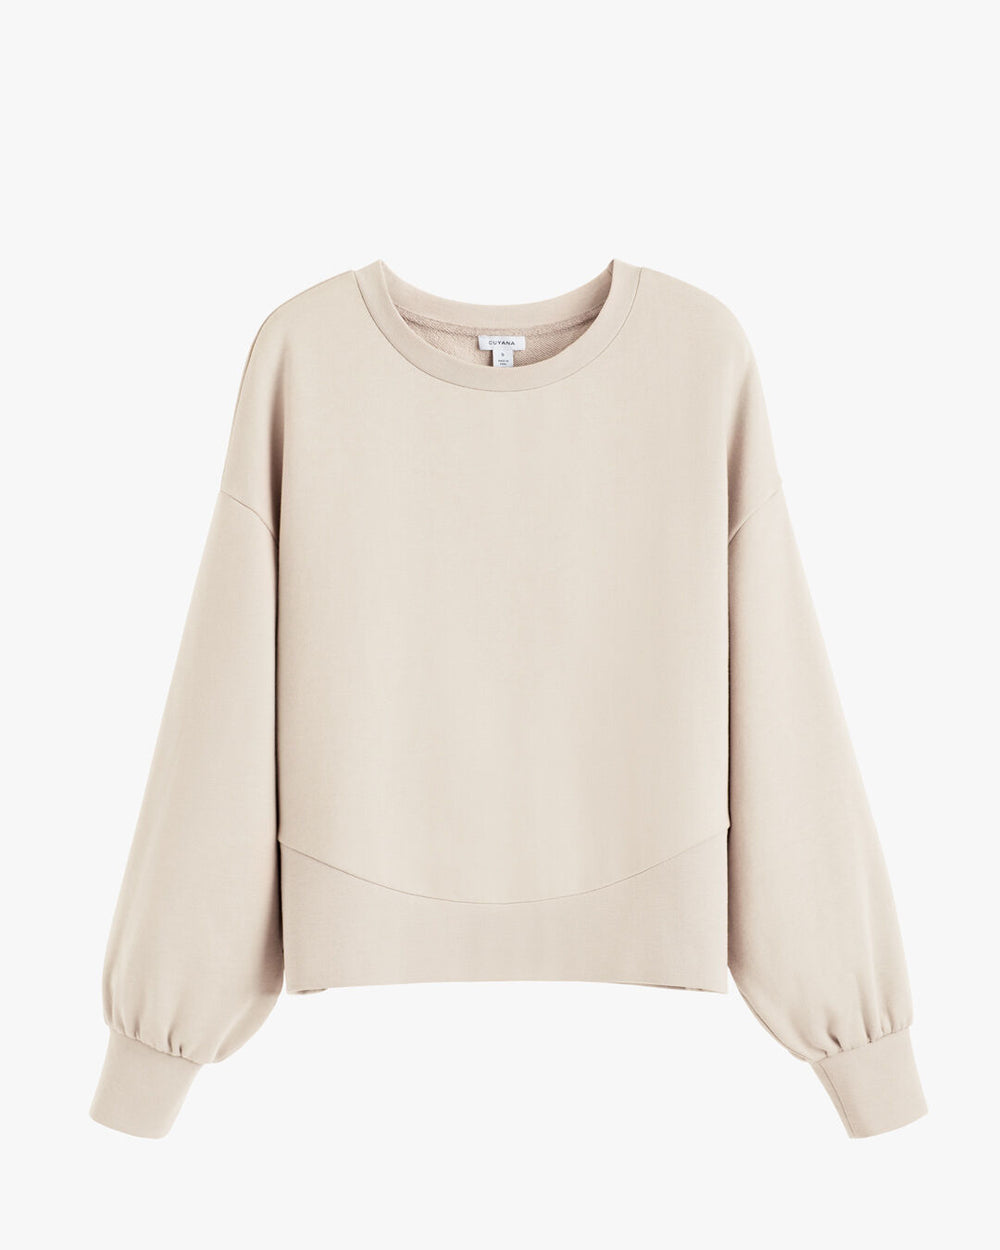 Plain crew neck sweatshirt with long sleeves and elastic cuffs.